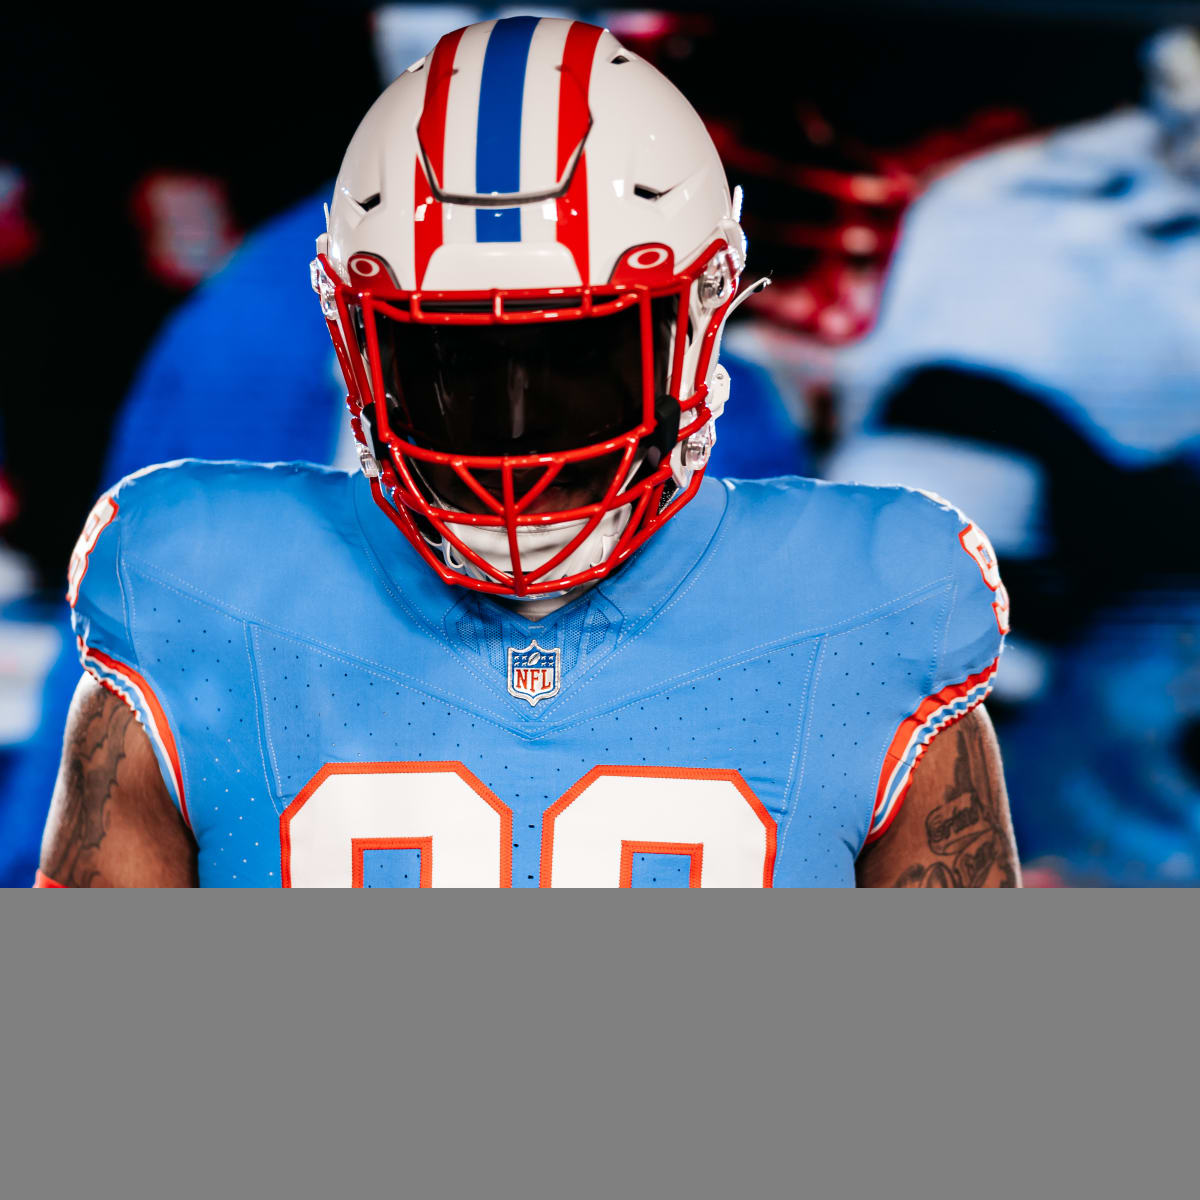 PHOTOS: The Tennessee Titans will wear throwback Oilers uniforms